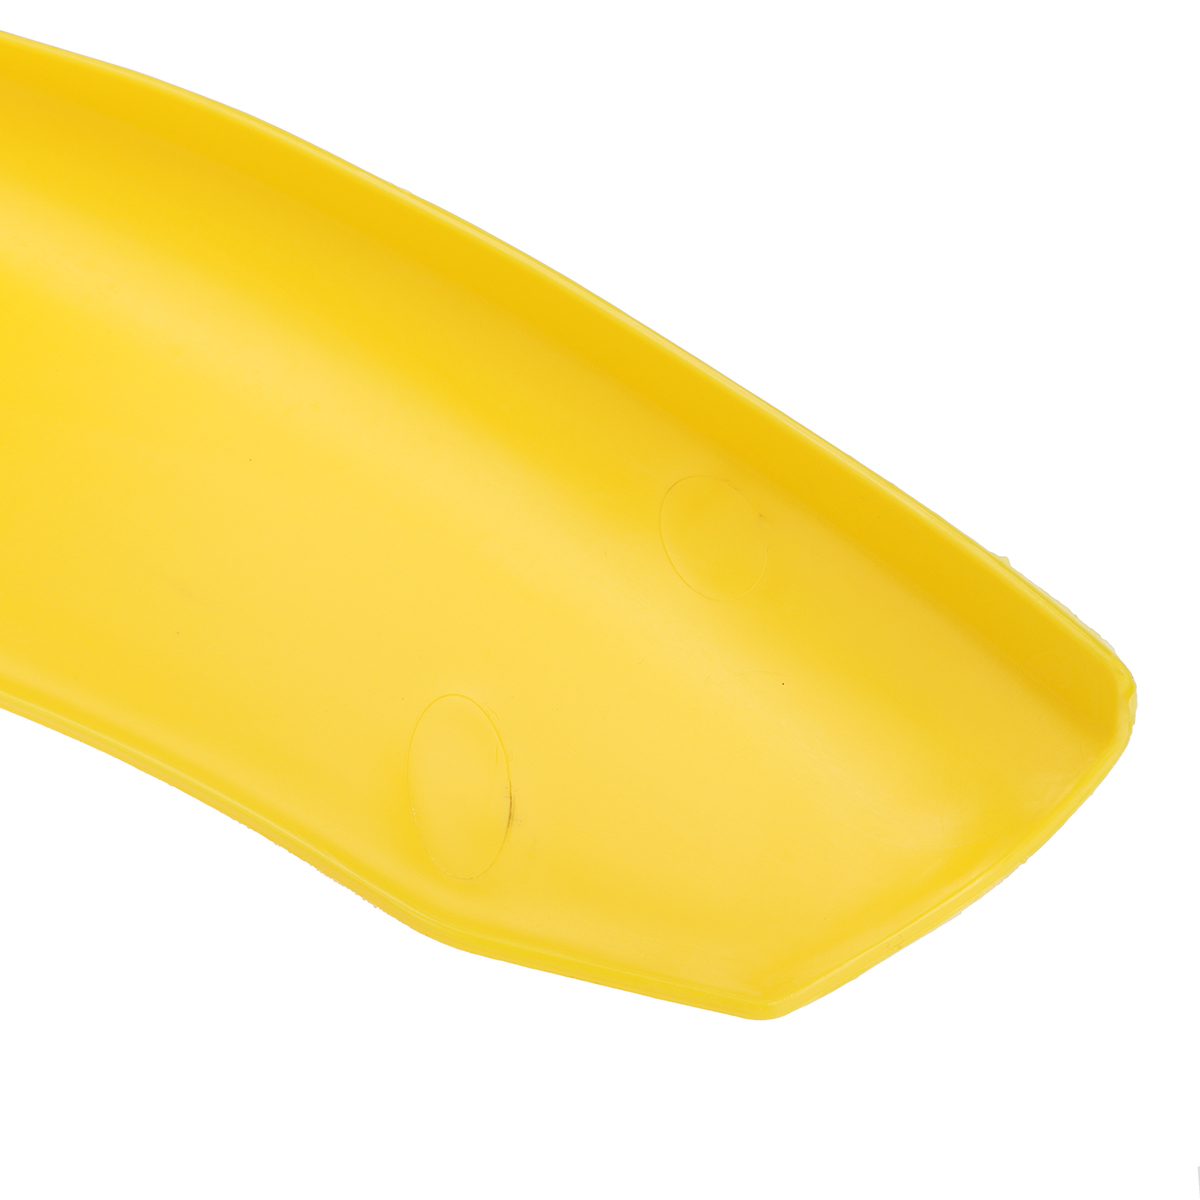 Front Bumper Lip Splitter Protector Yellow for Dodge Charger SRT Scat Pack 2015-2019